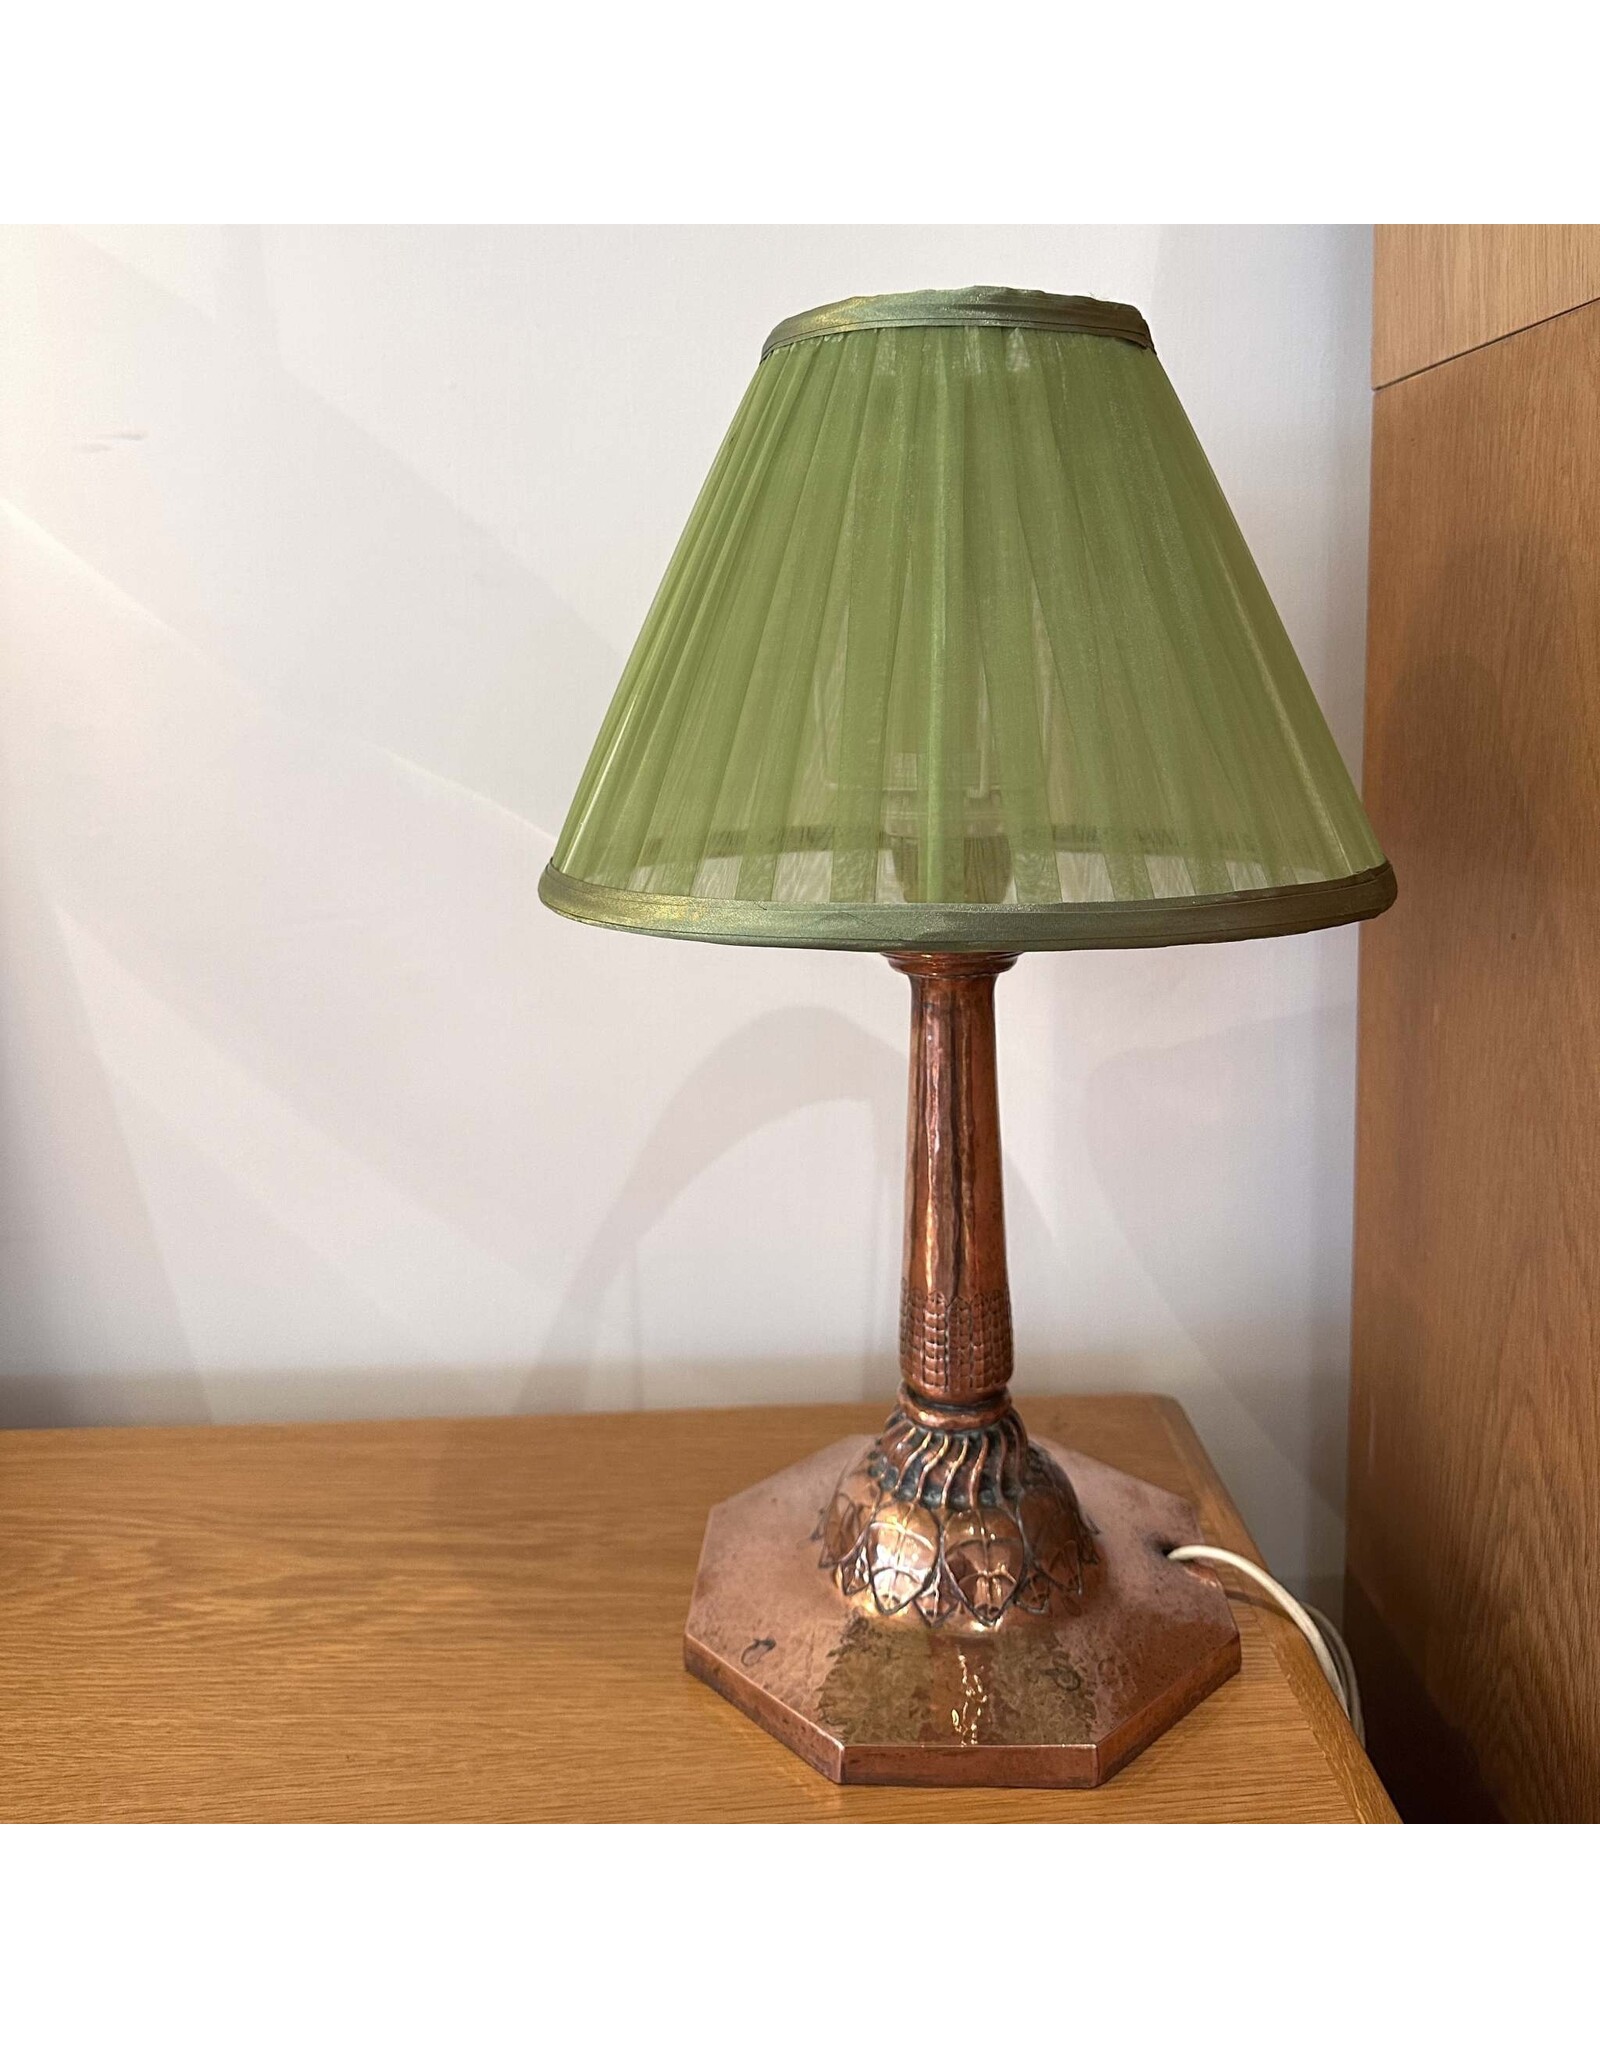 1900's JUGEND COPPER TABLE LAMP WITH GREEN CHIFFON SHADE